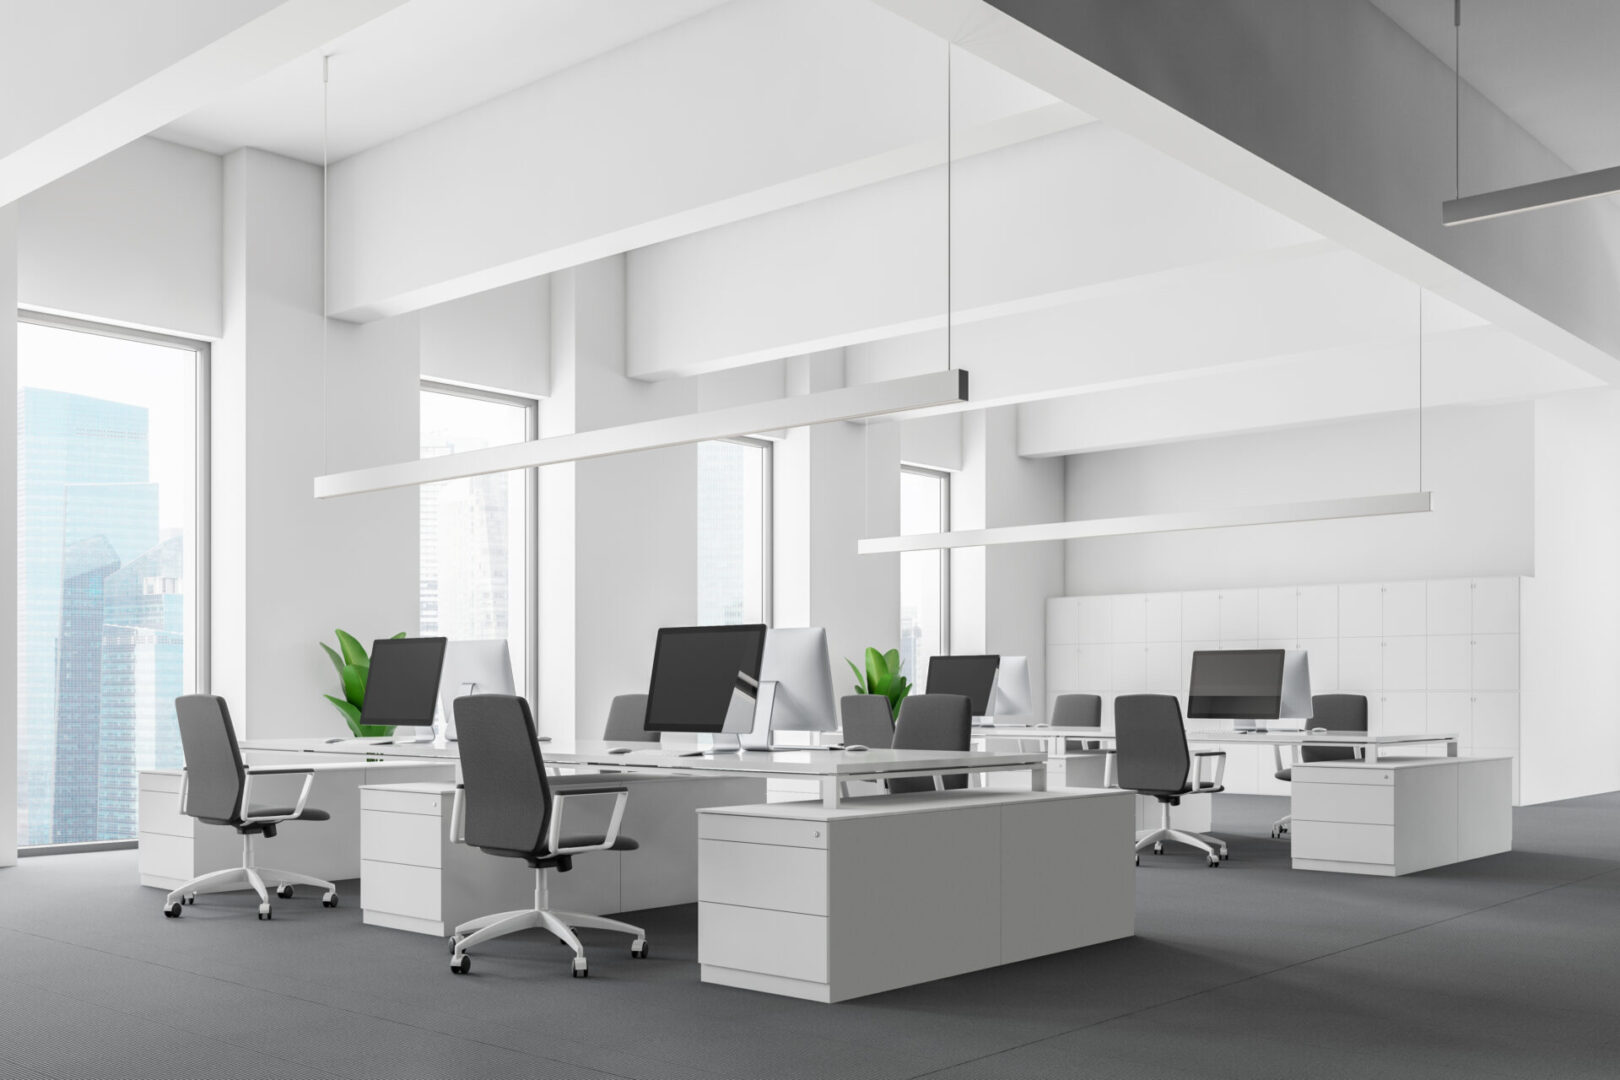 A large open office space with white walls and furniture.